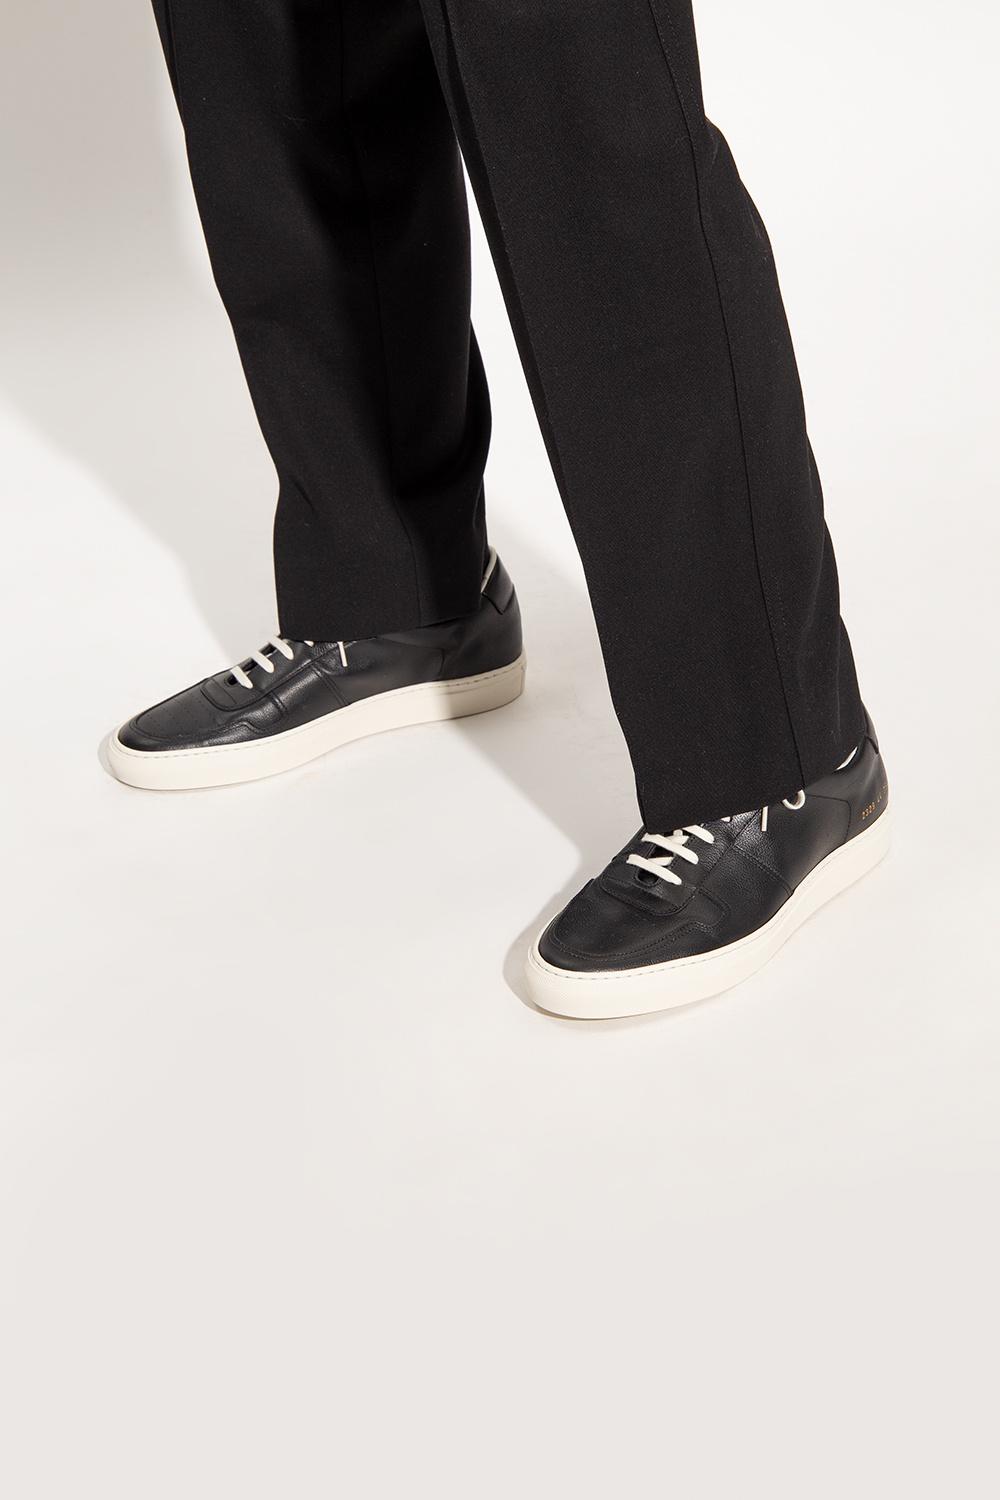 Common Projects 'bball Summer Edition' Sneakers in Black for Men | Lyst